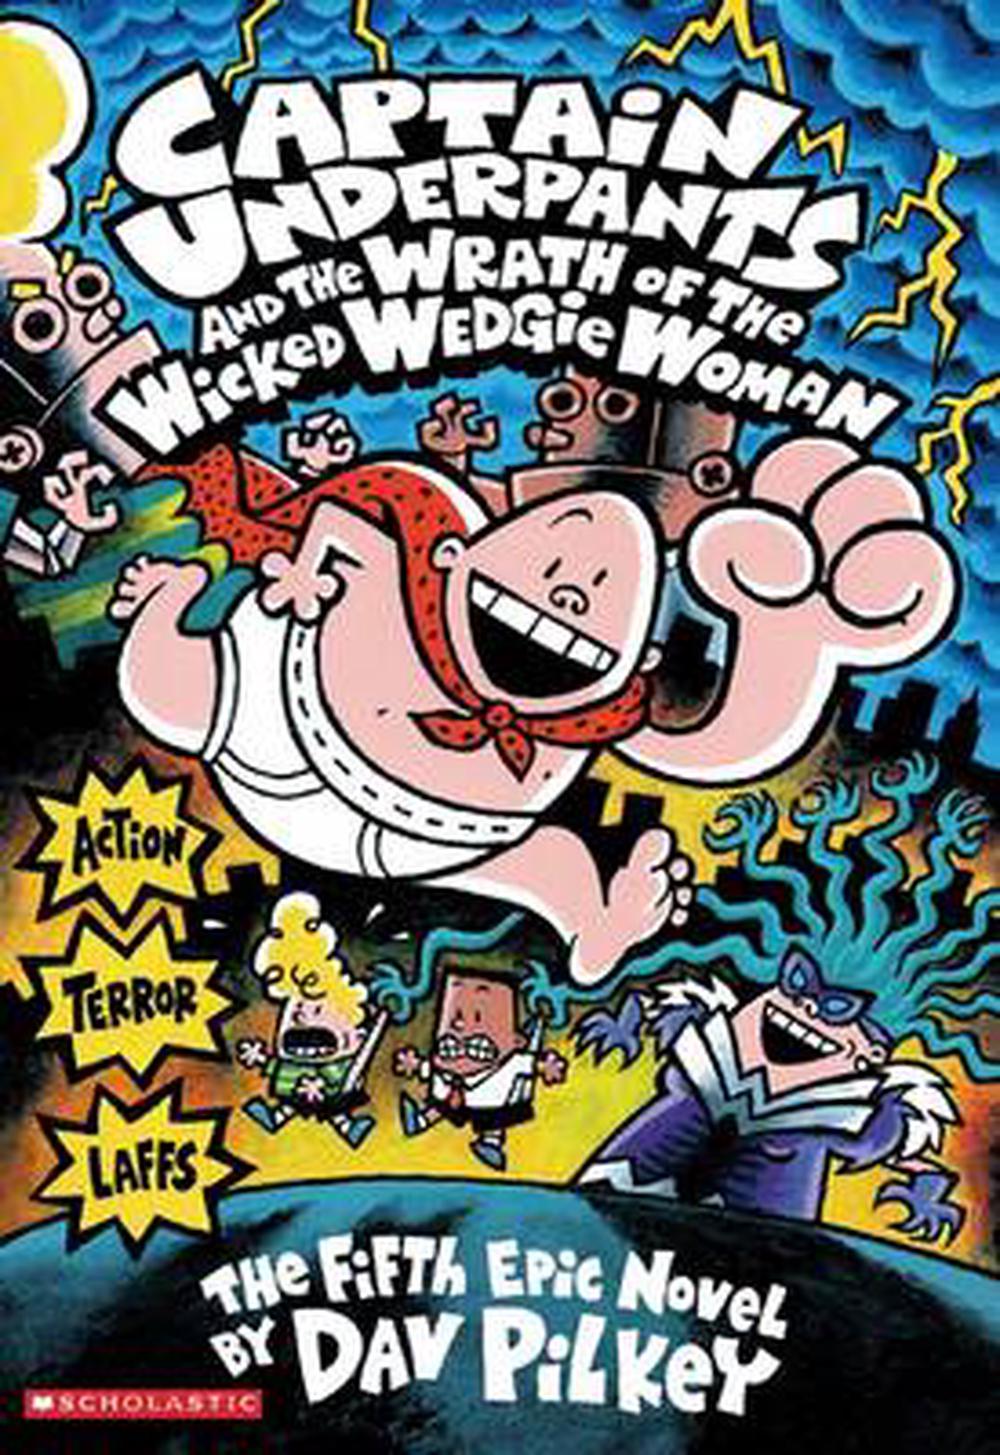 Captain Underpants: And the wrath of the wicked wedgie Woman.